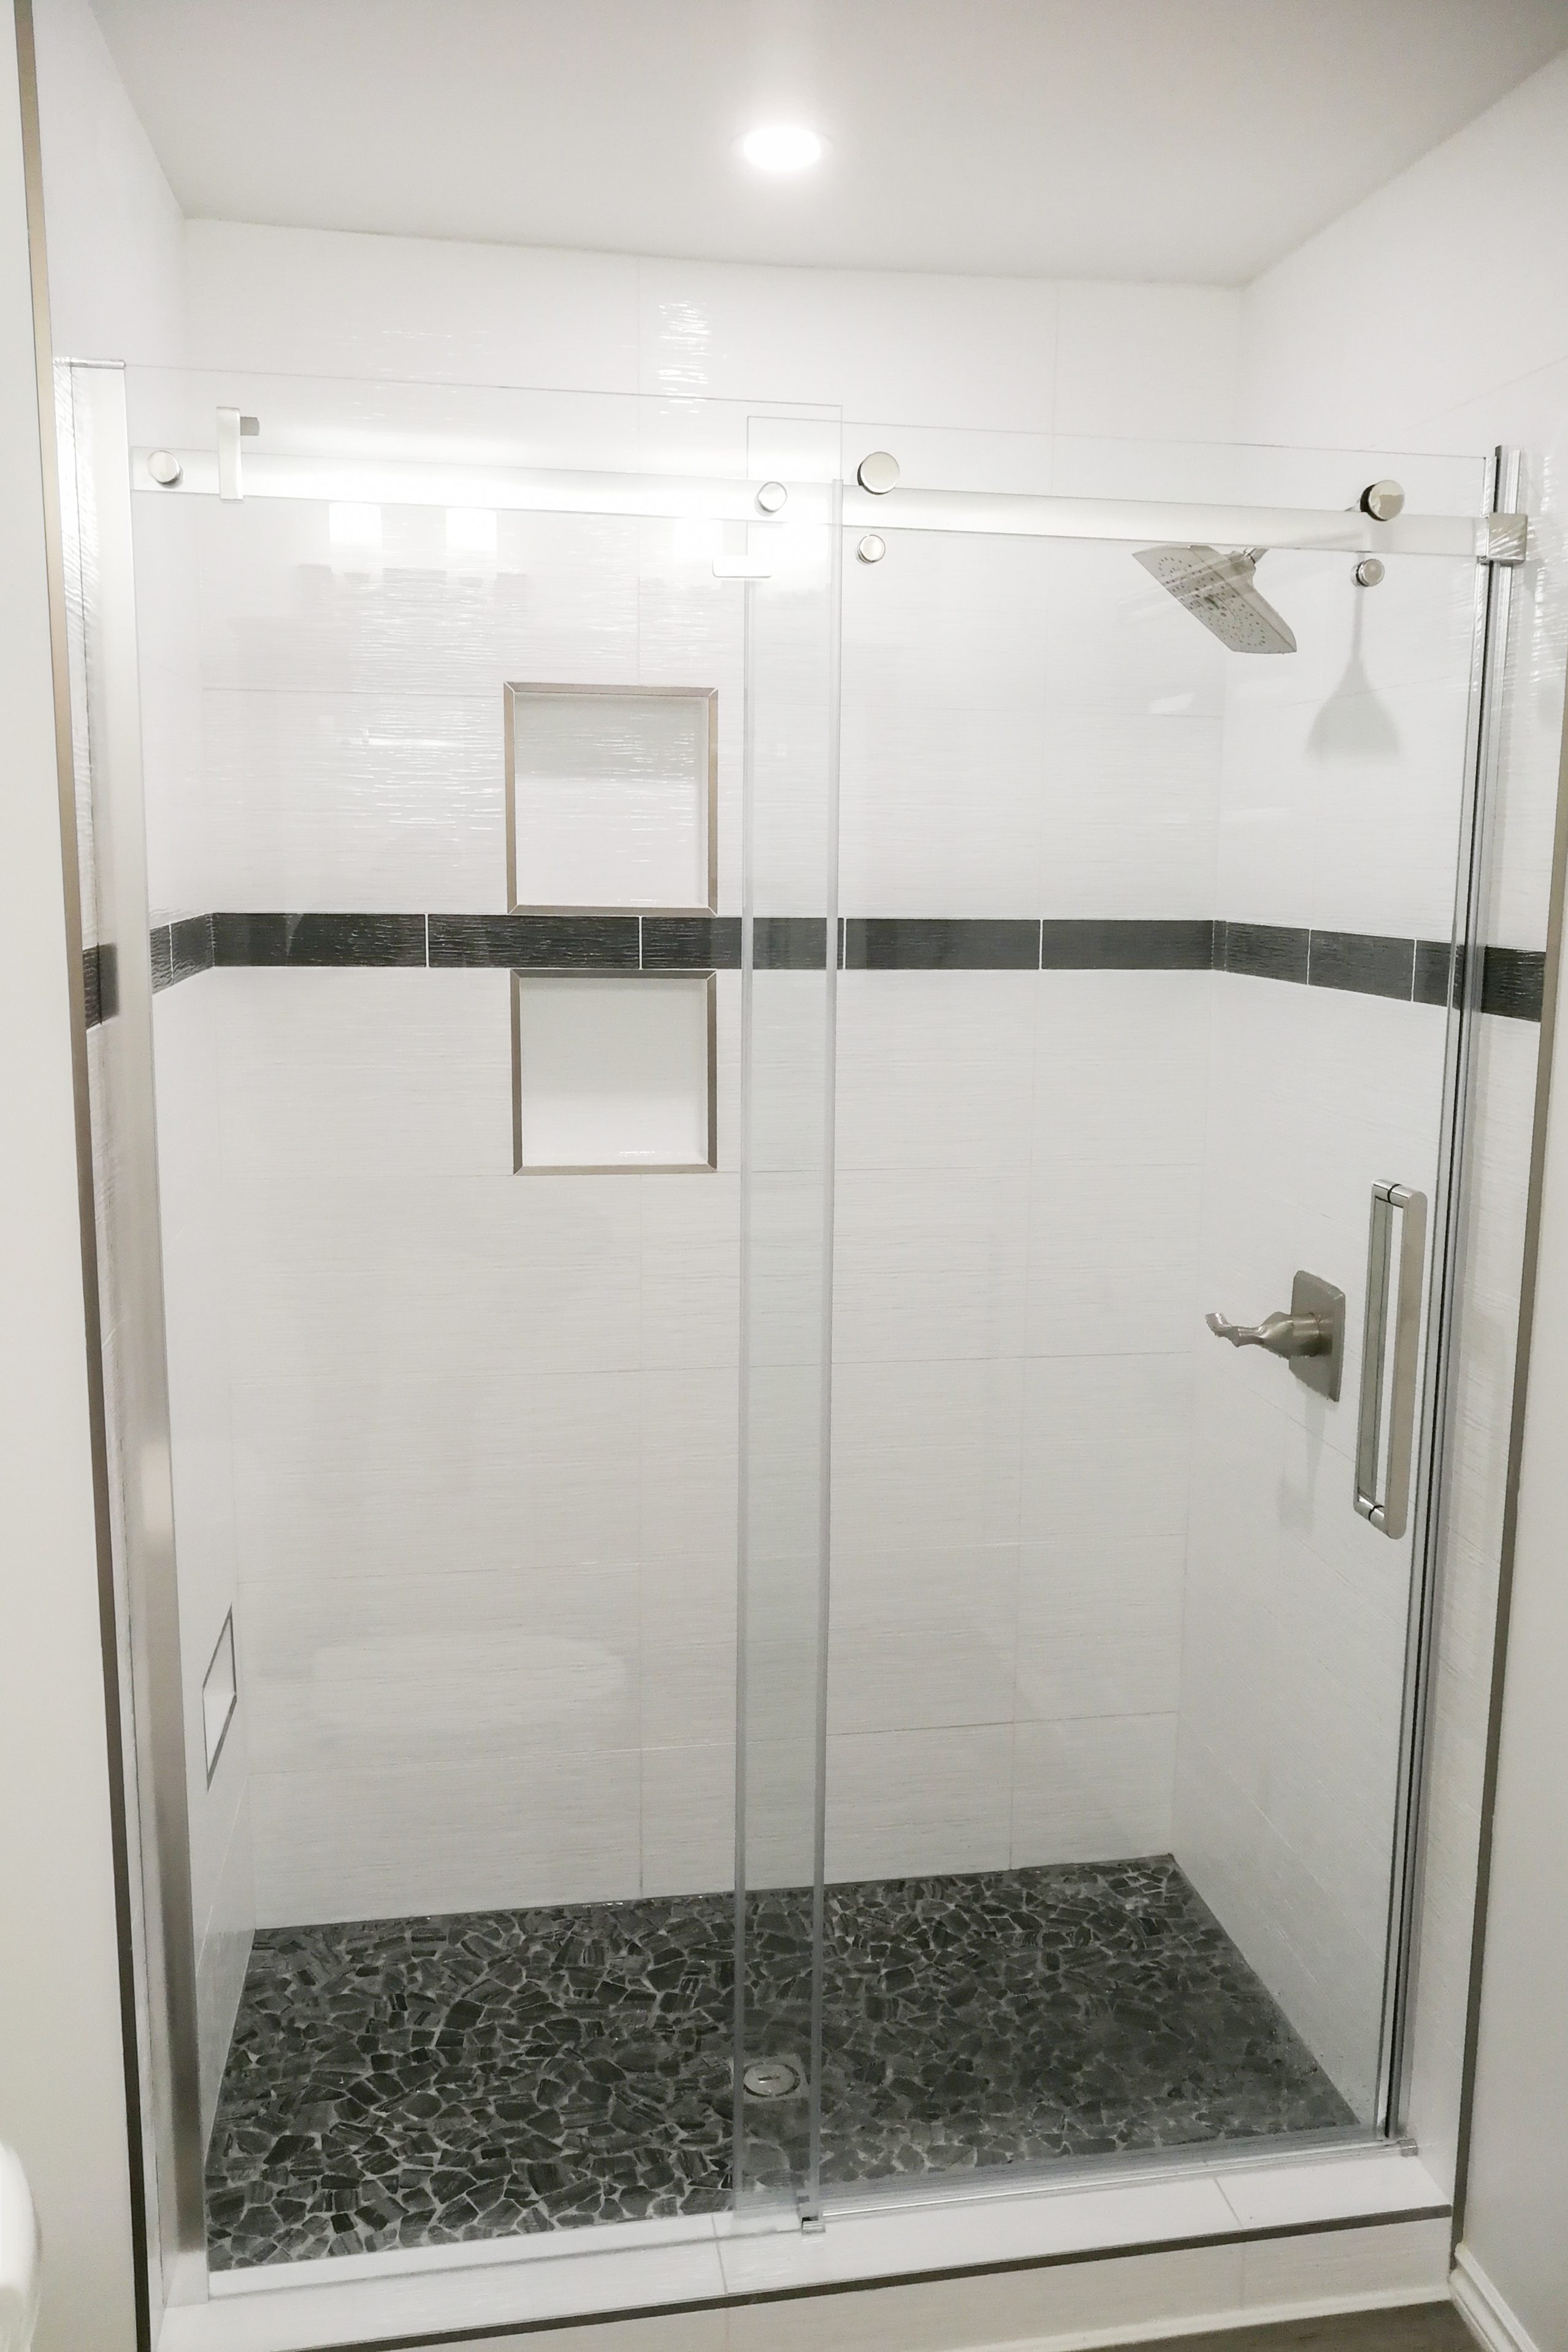 A newly-renovated shower area with stone flooring and modern showerheads for a bathroom renovation project